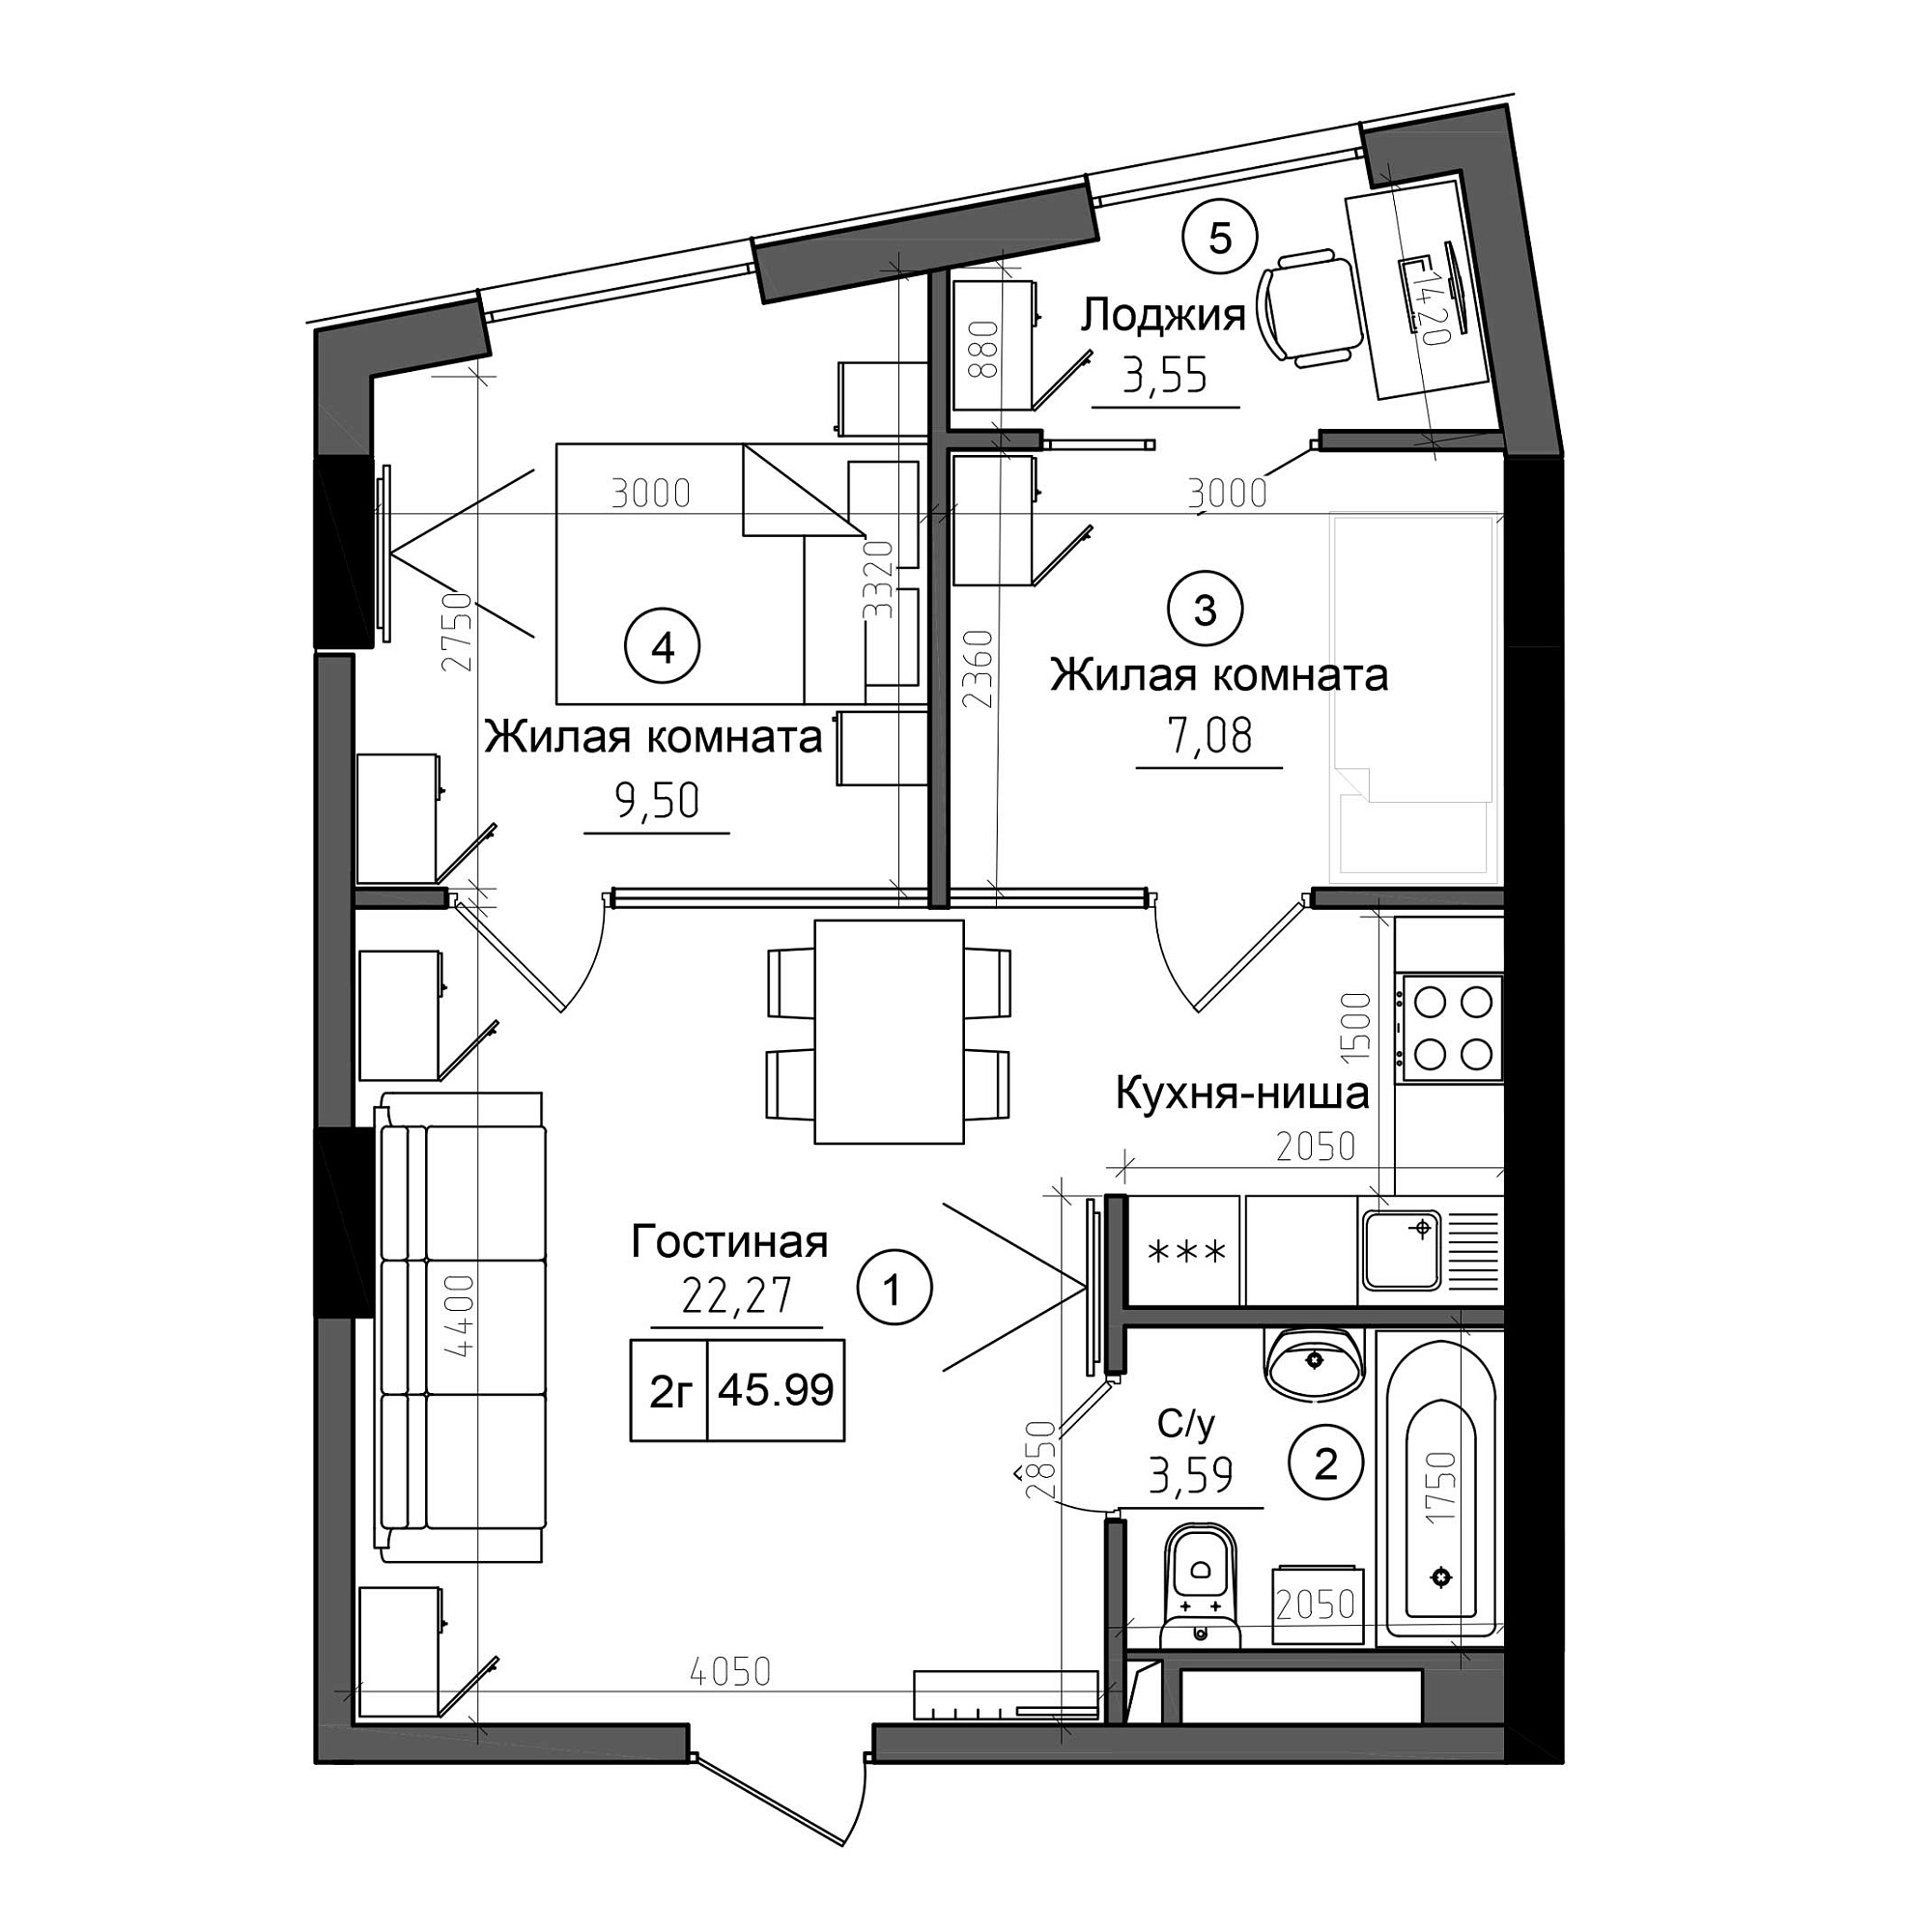 Planning 2-rm flats area 45.99m2, AB-20-07/0001а.